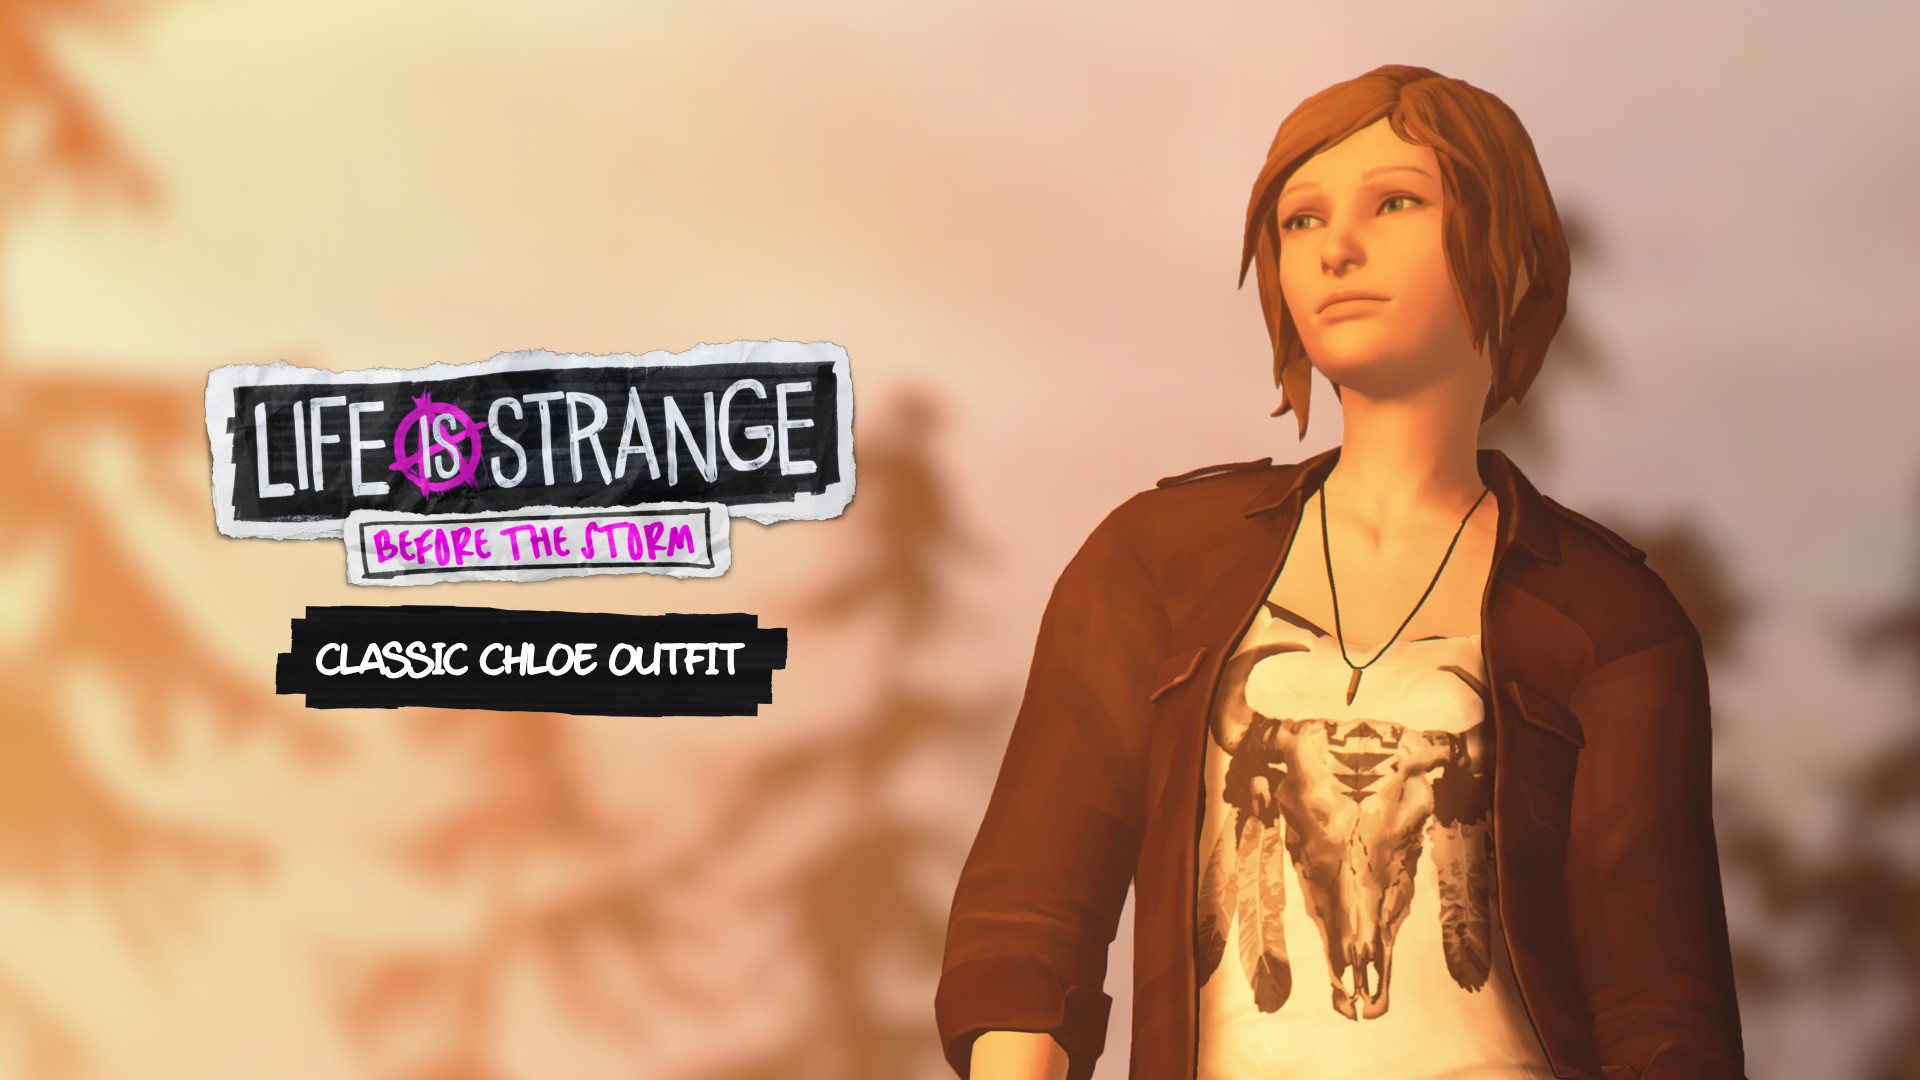 Life is Strange: Before the Storm - Classic Chloe Outfit Pack DLC XBOX One CD Key 0.89 usd